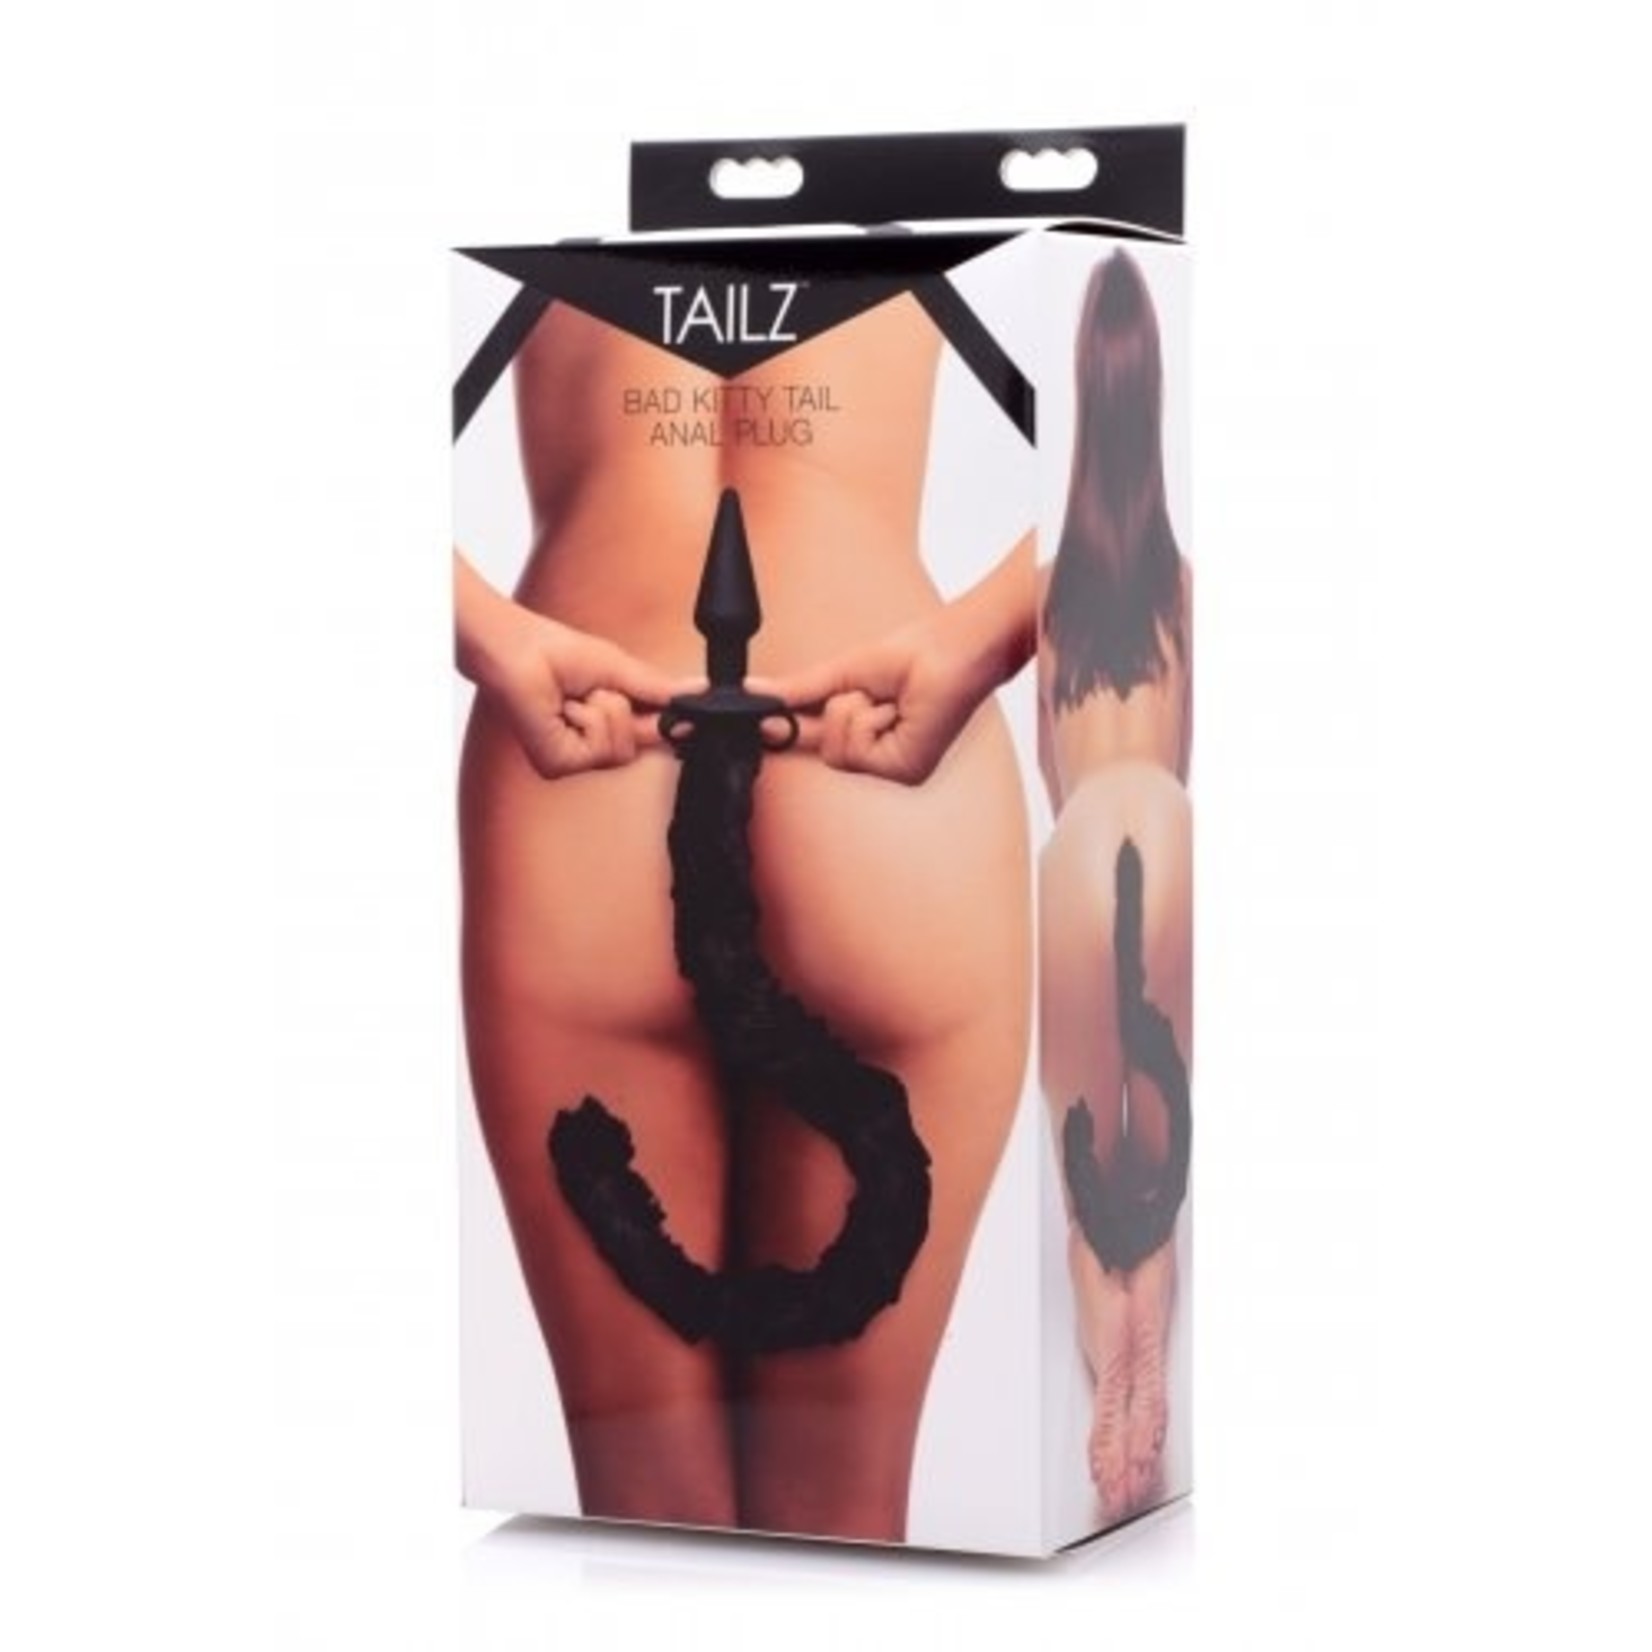 XR BRANDS TAILZ - BAD KITTY SILICONE CAT TAIL ANAL PLUG